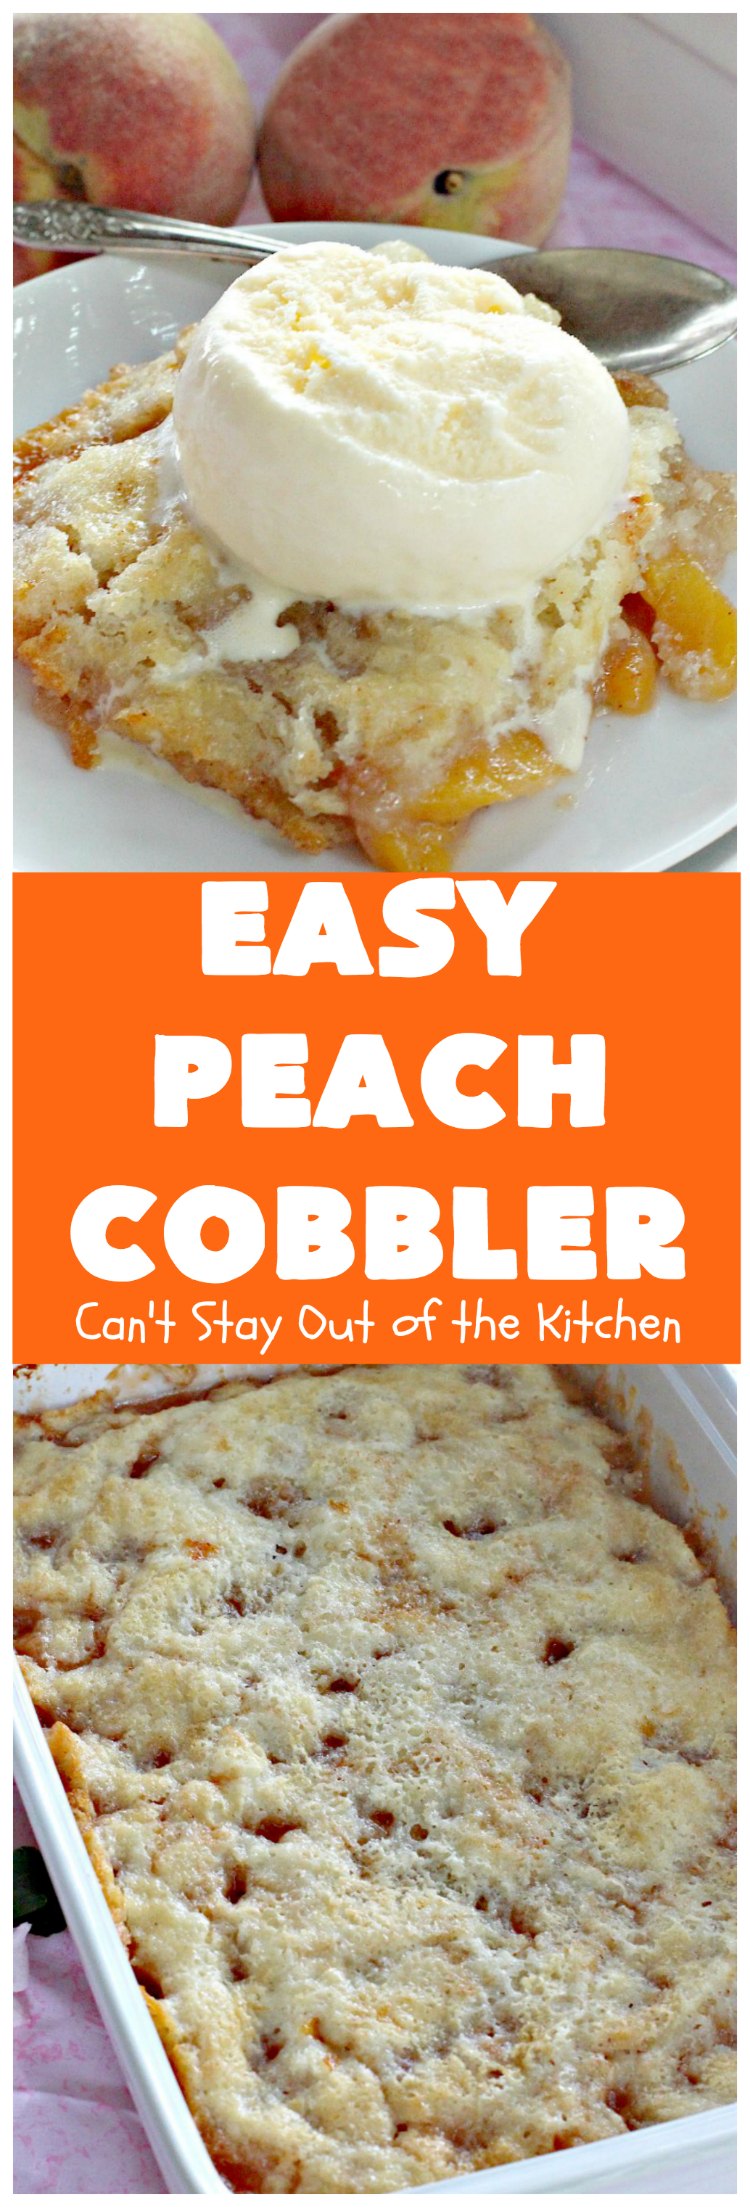 Easy Peach Cobbler | Can't Stay Out of the Kitchen